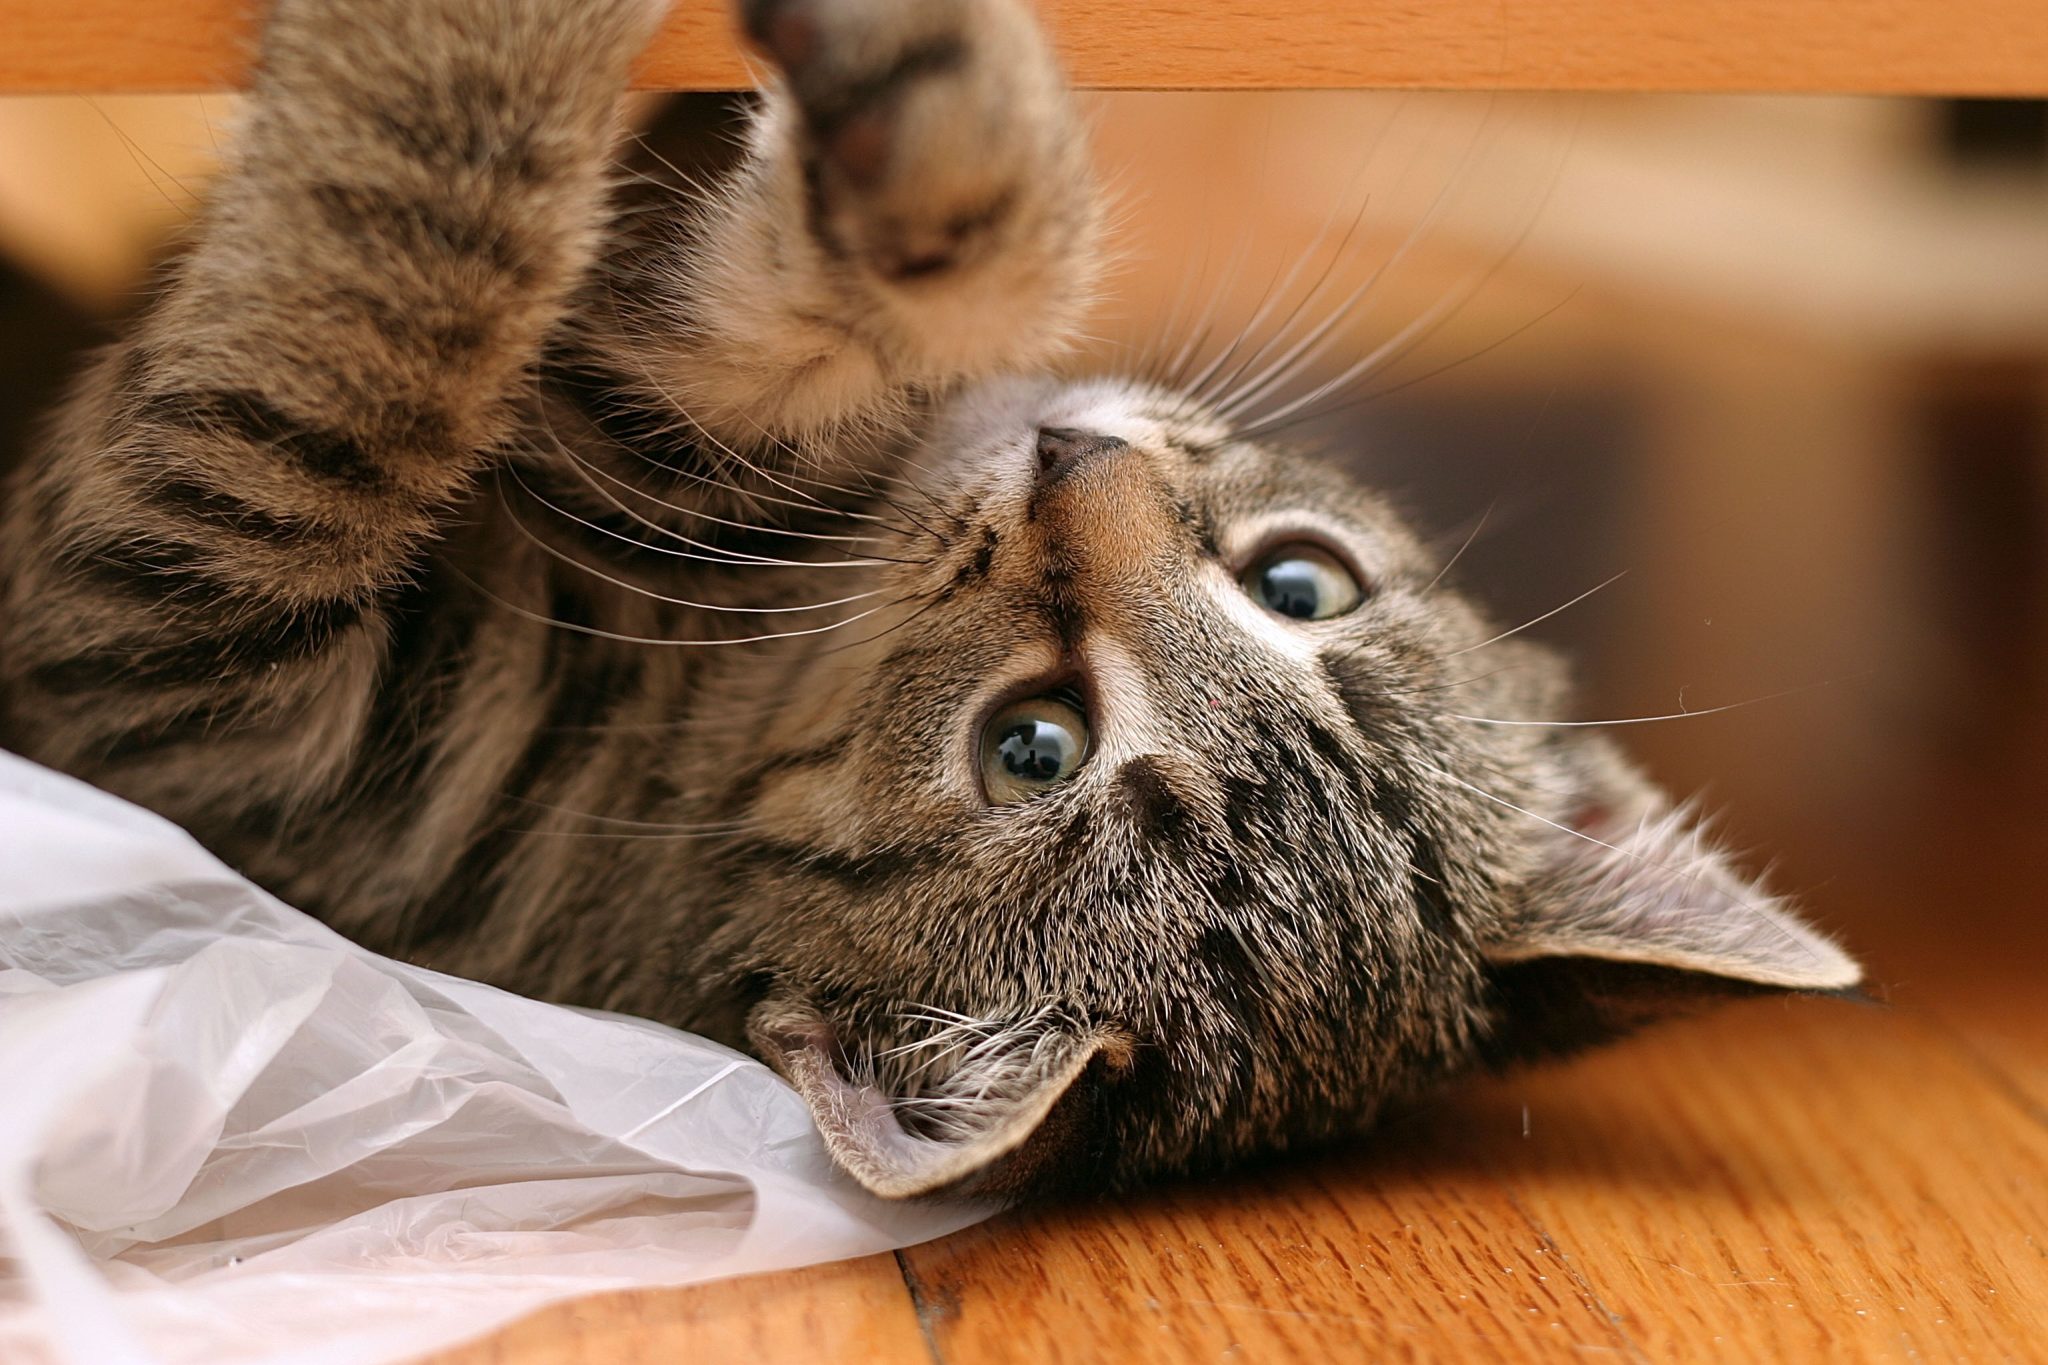 Kitten At Play with plastic bag